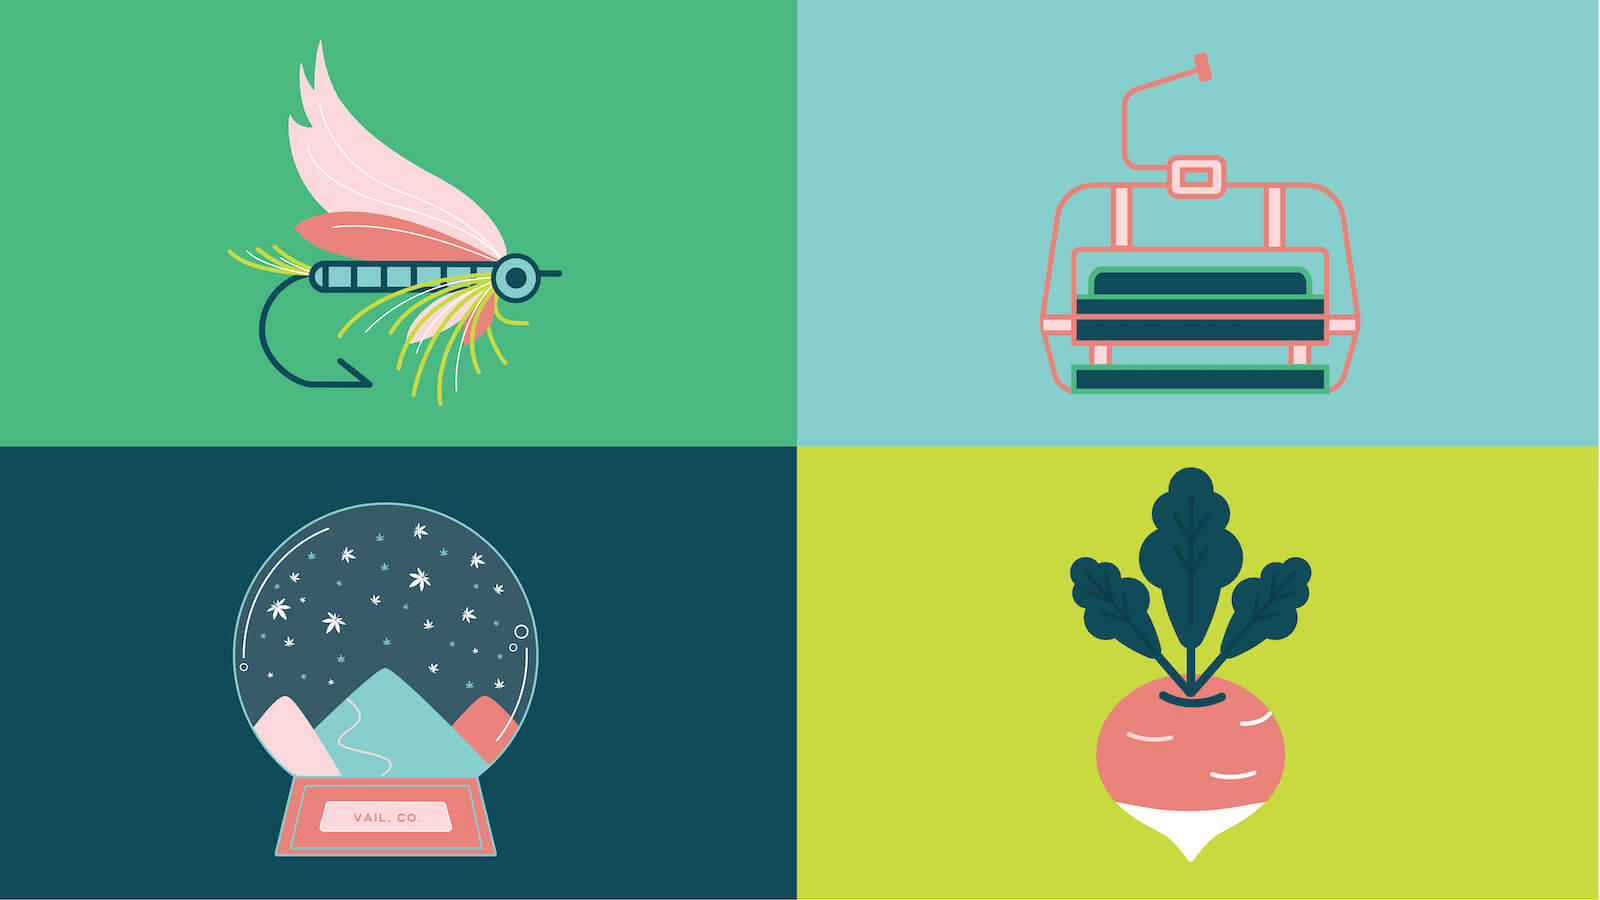 Town of Vail campaign branding icons